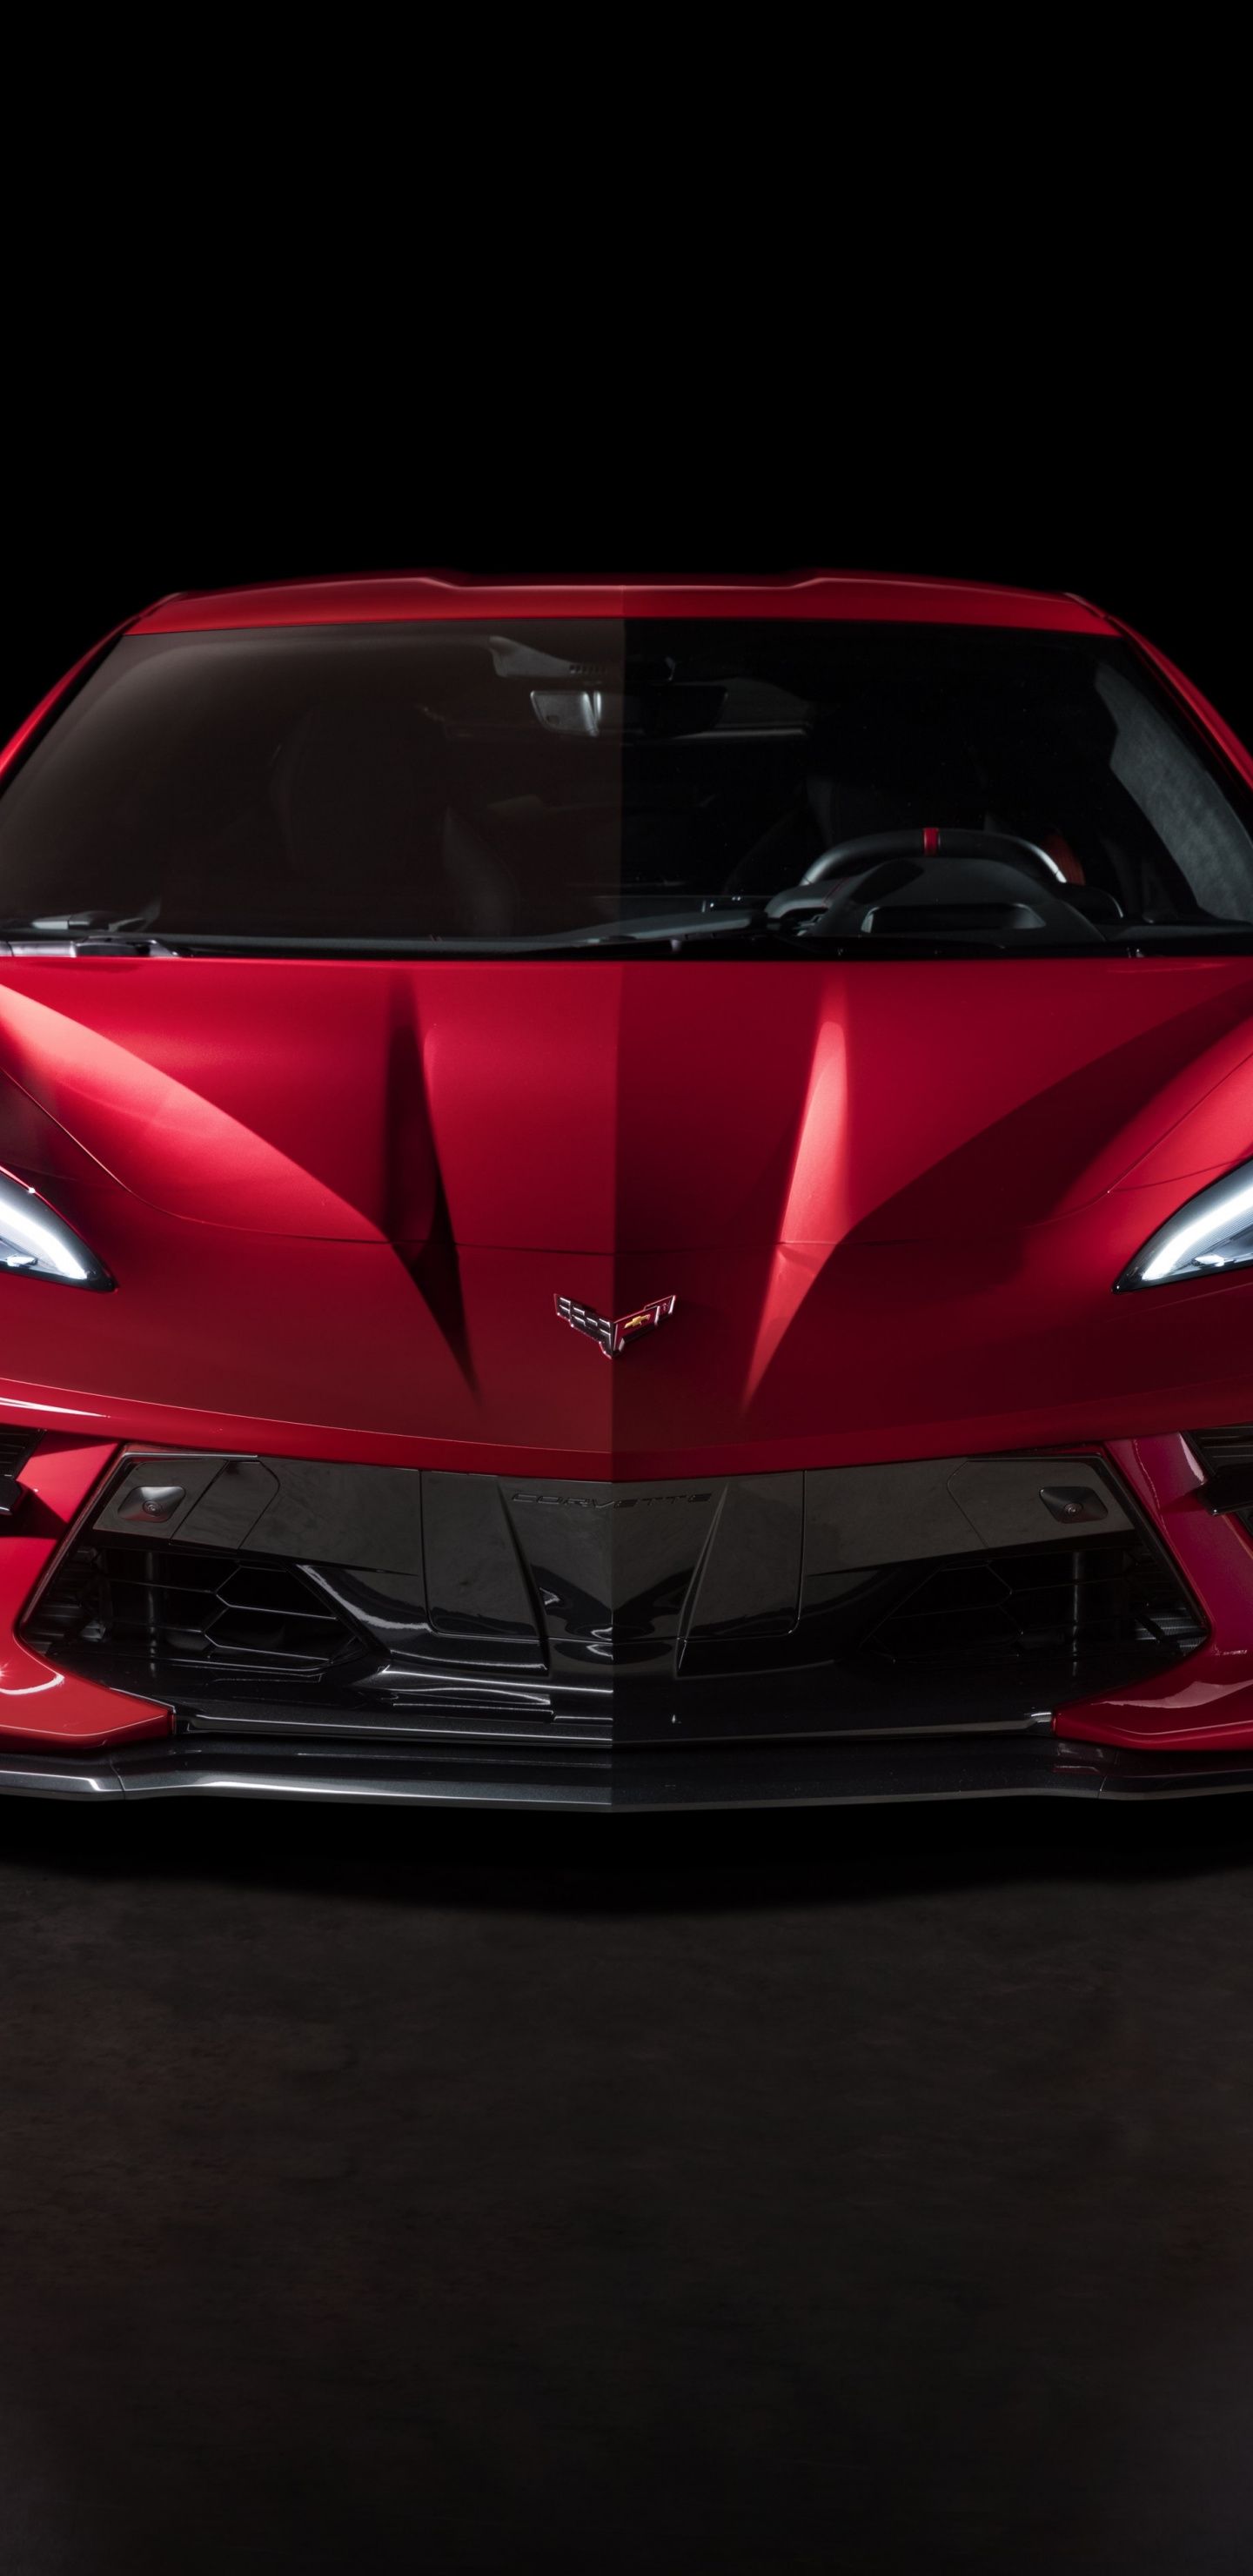 1440x2960 Chevrolet Corvette, red car, front wallpapers